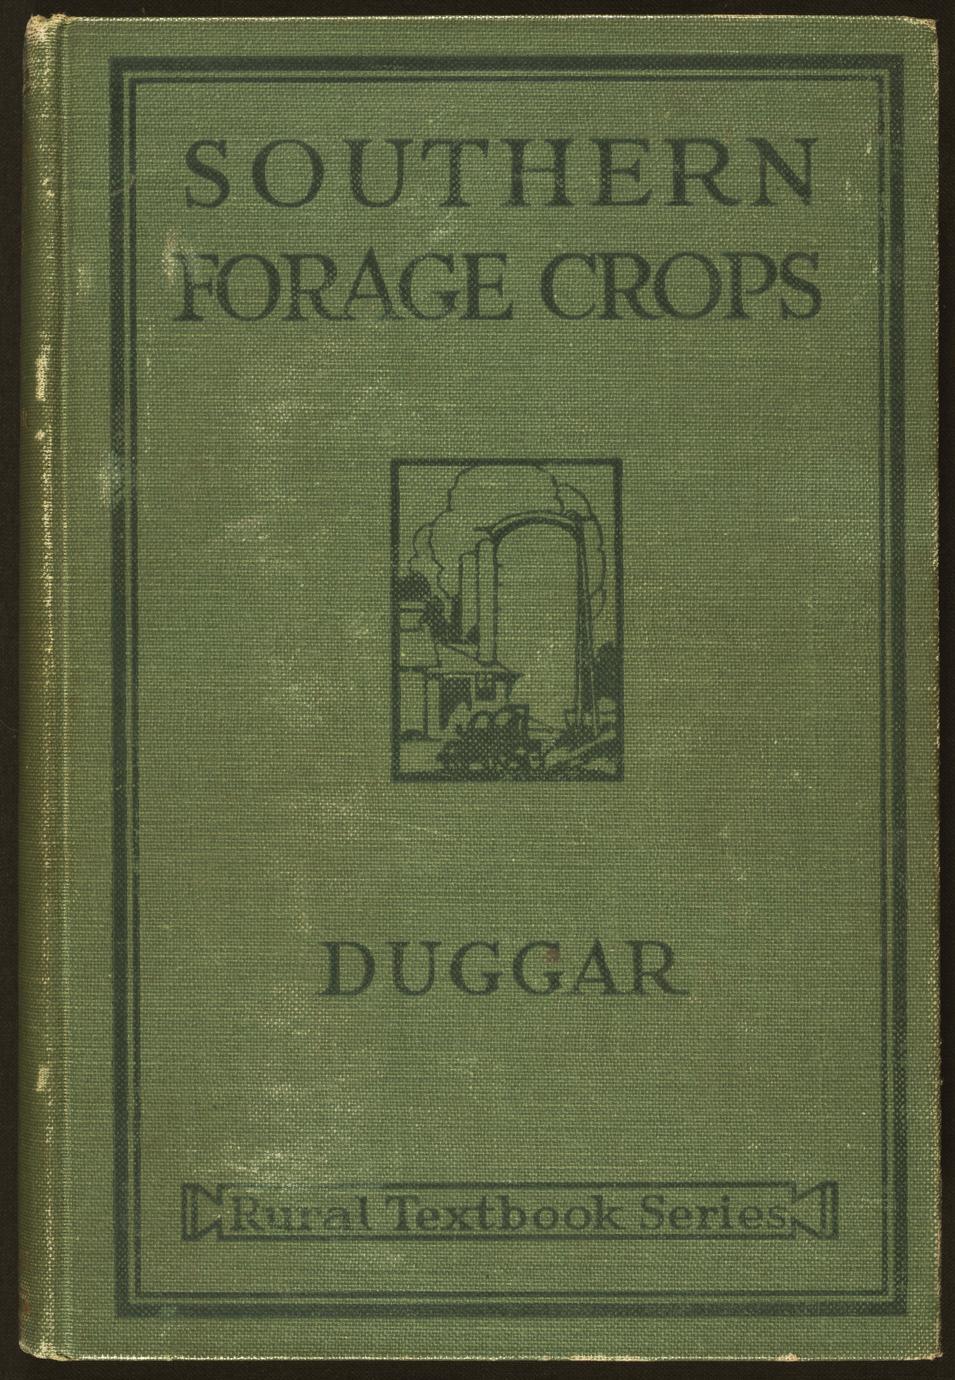 Southern forage crops (1 of 2)